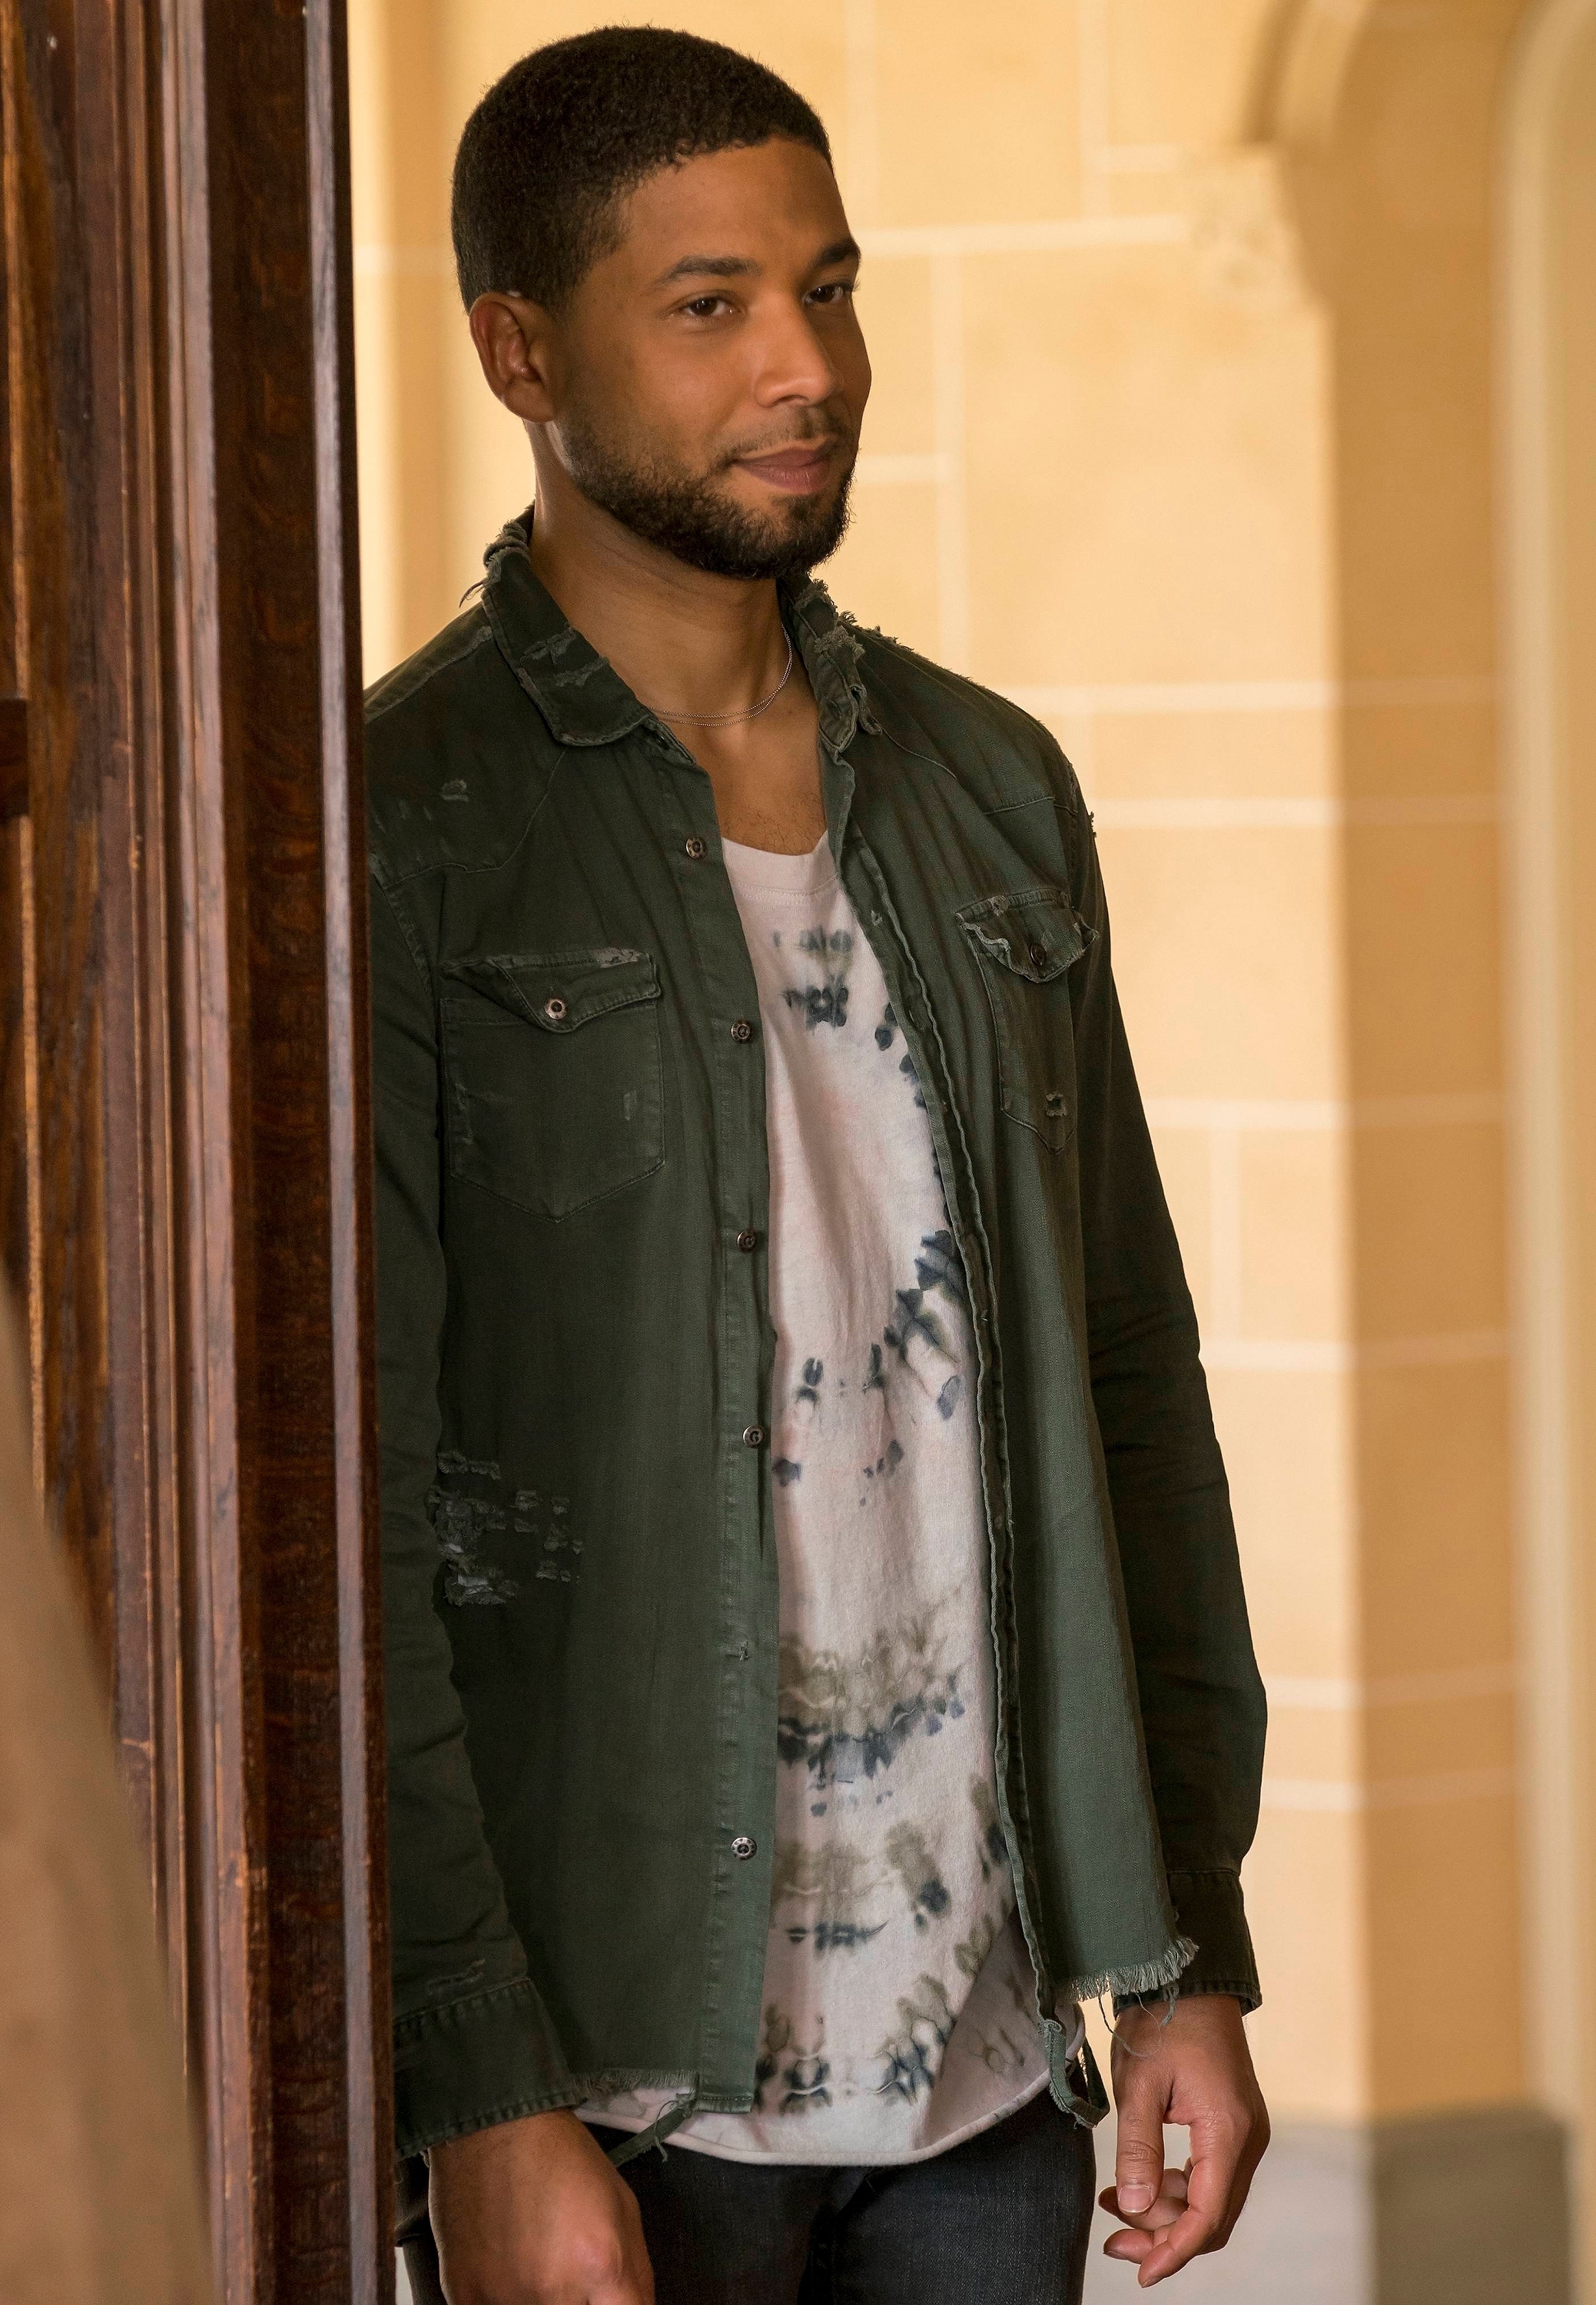 Close-up of Jussie standing in a doorway